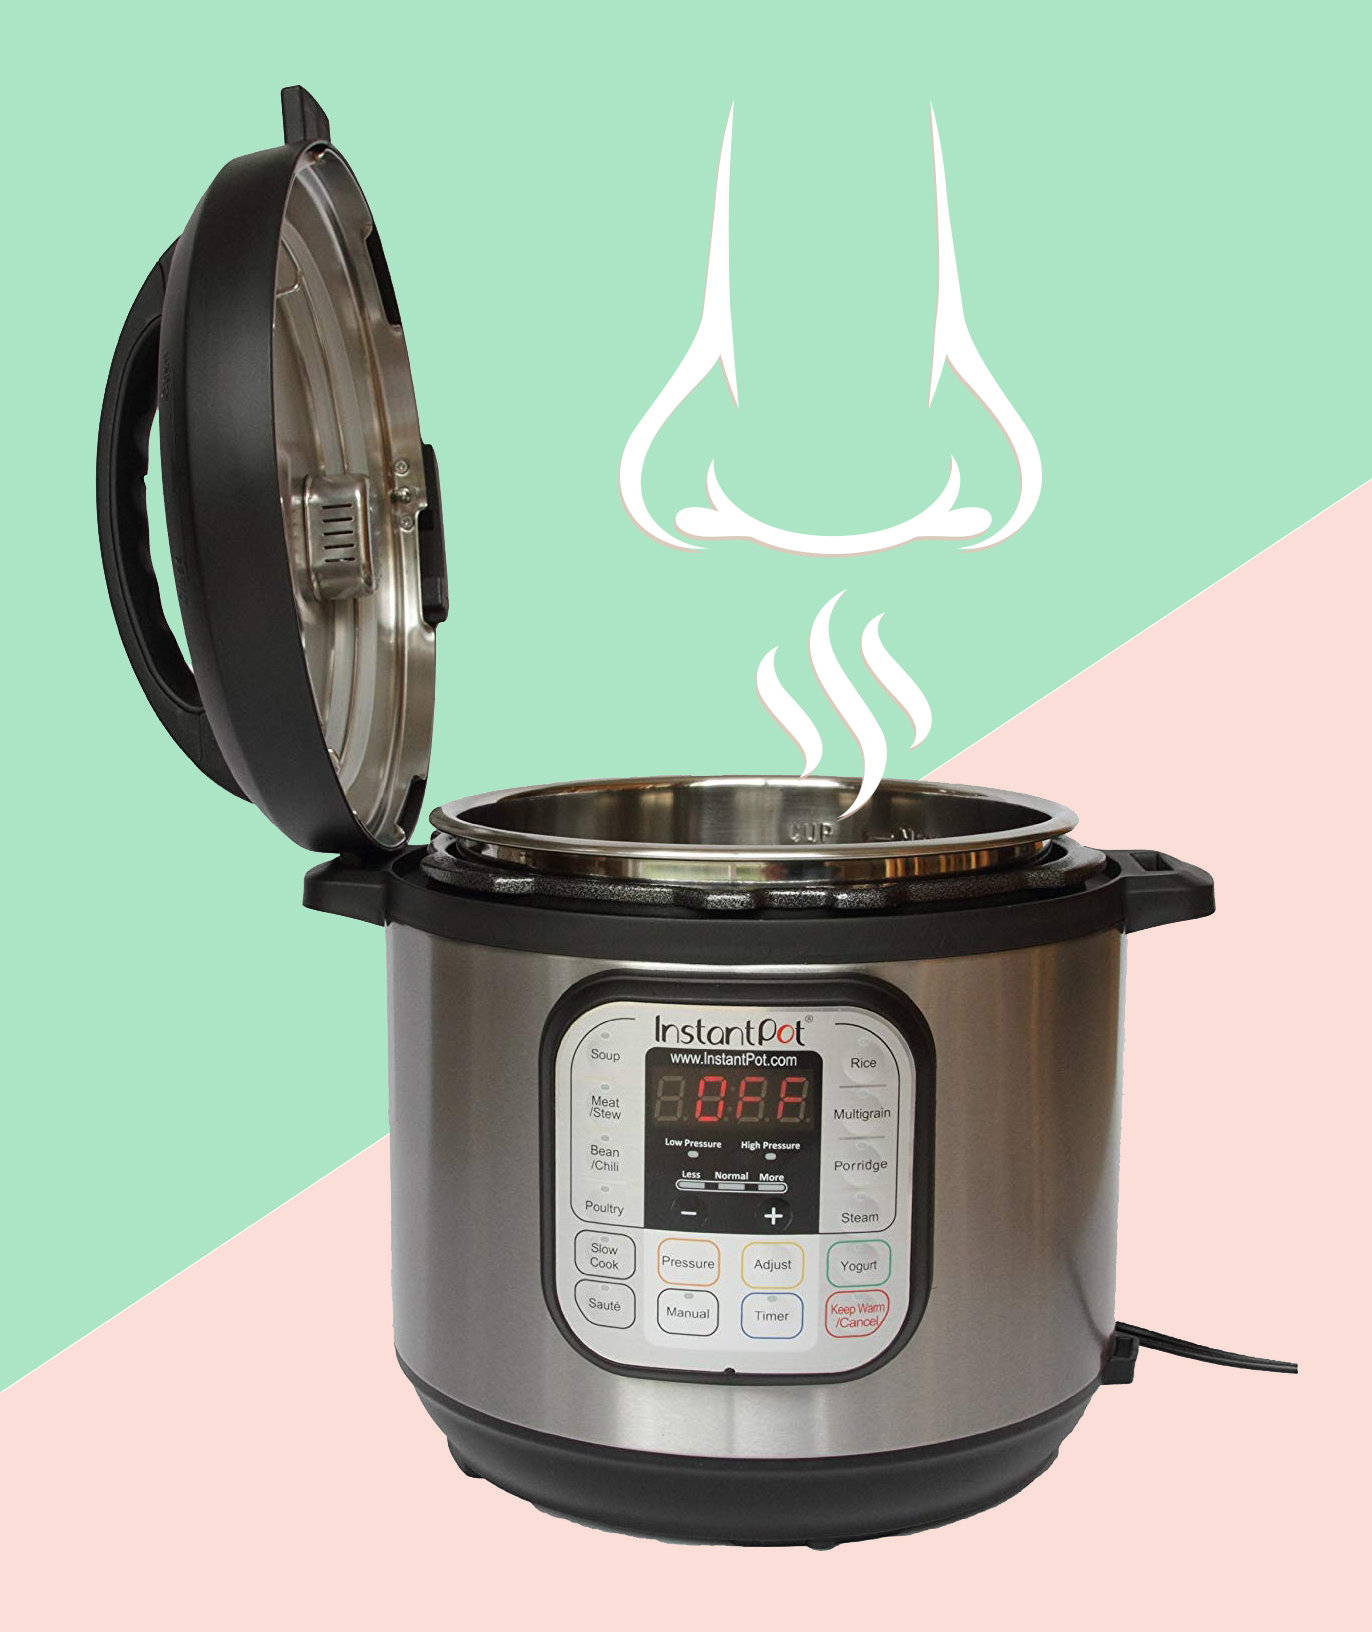 The Simple 2-Minute Fix to Get That Funky Smell Out of Your Instant Pot